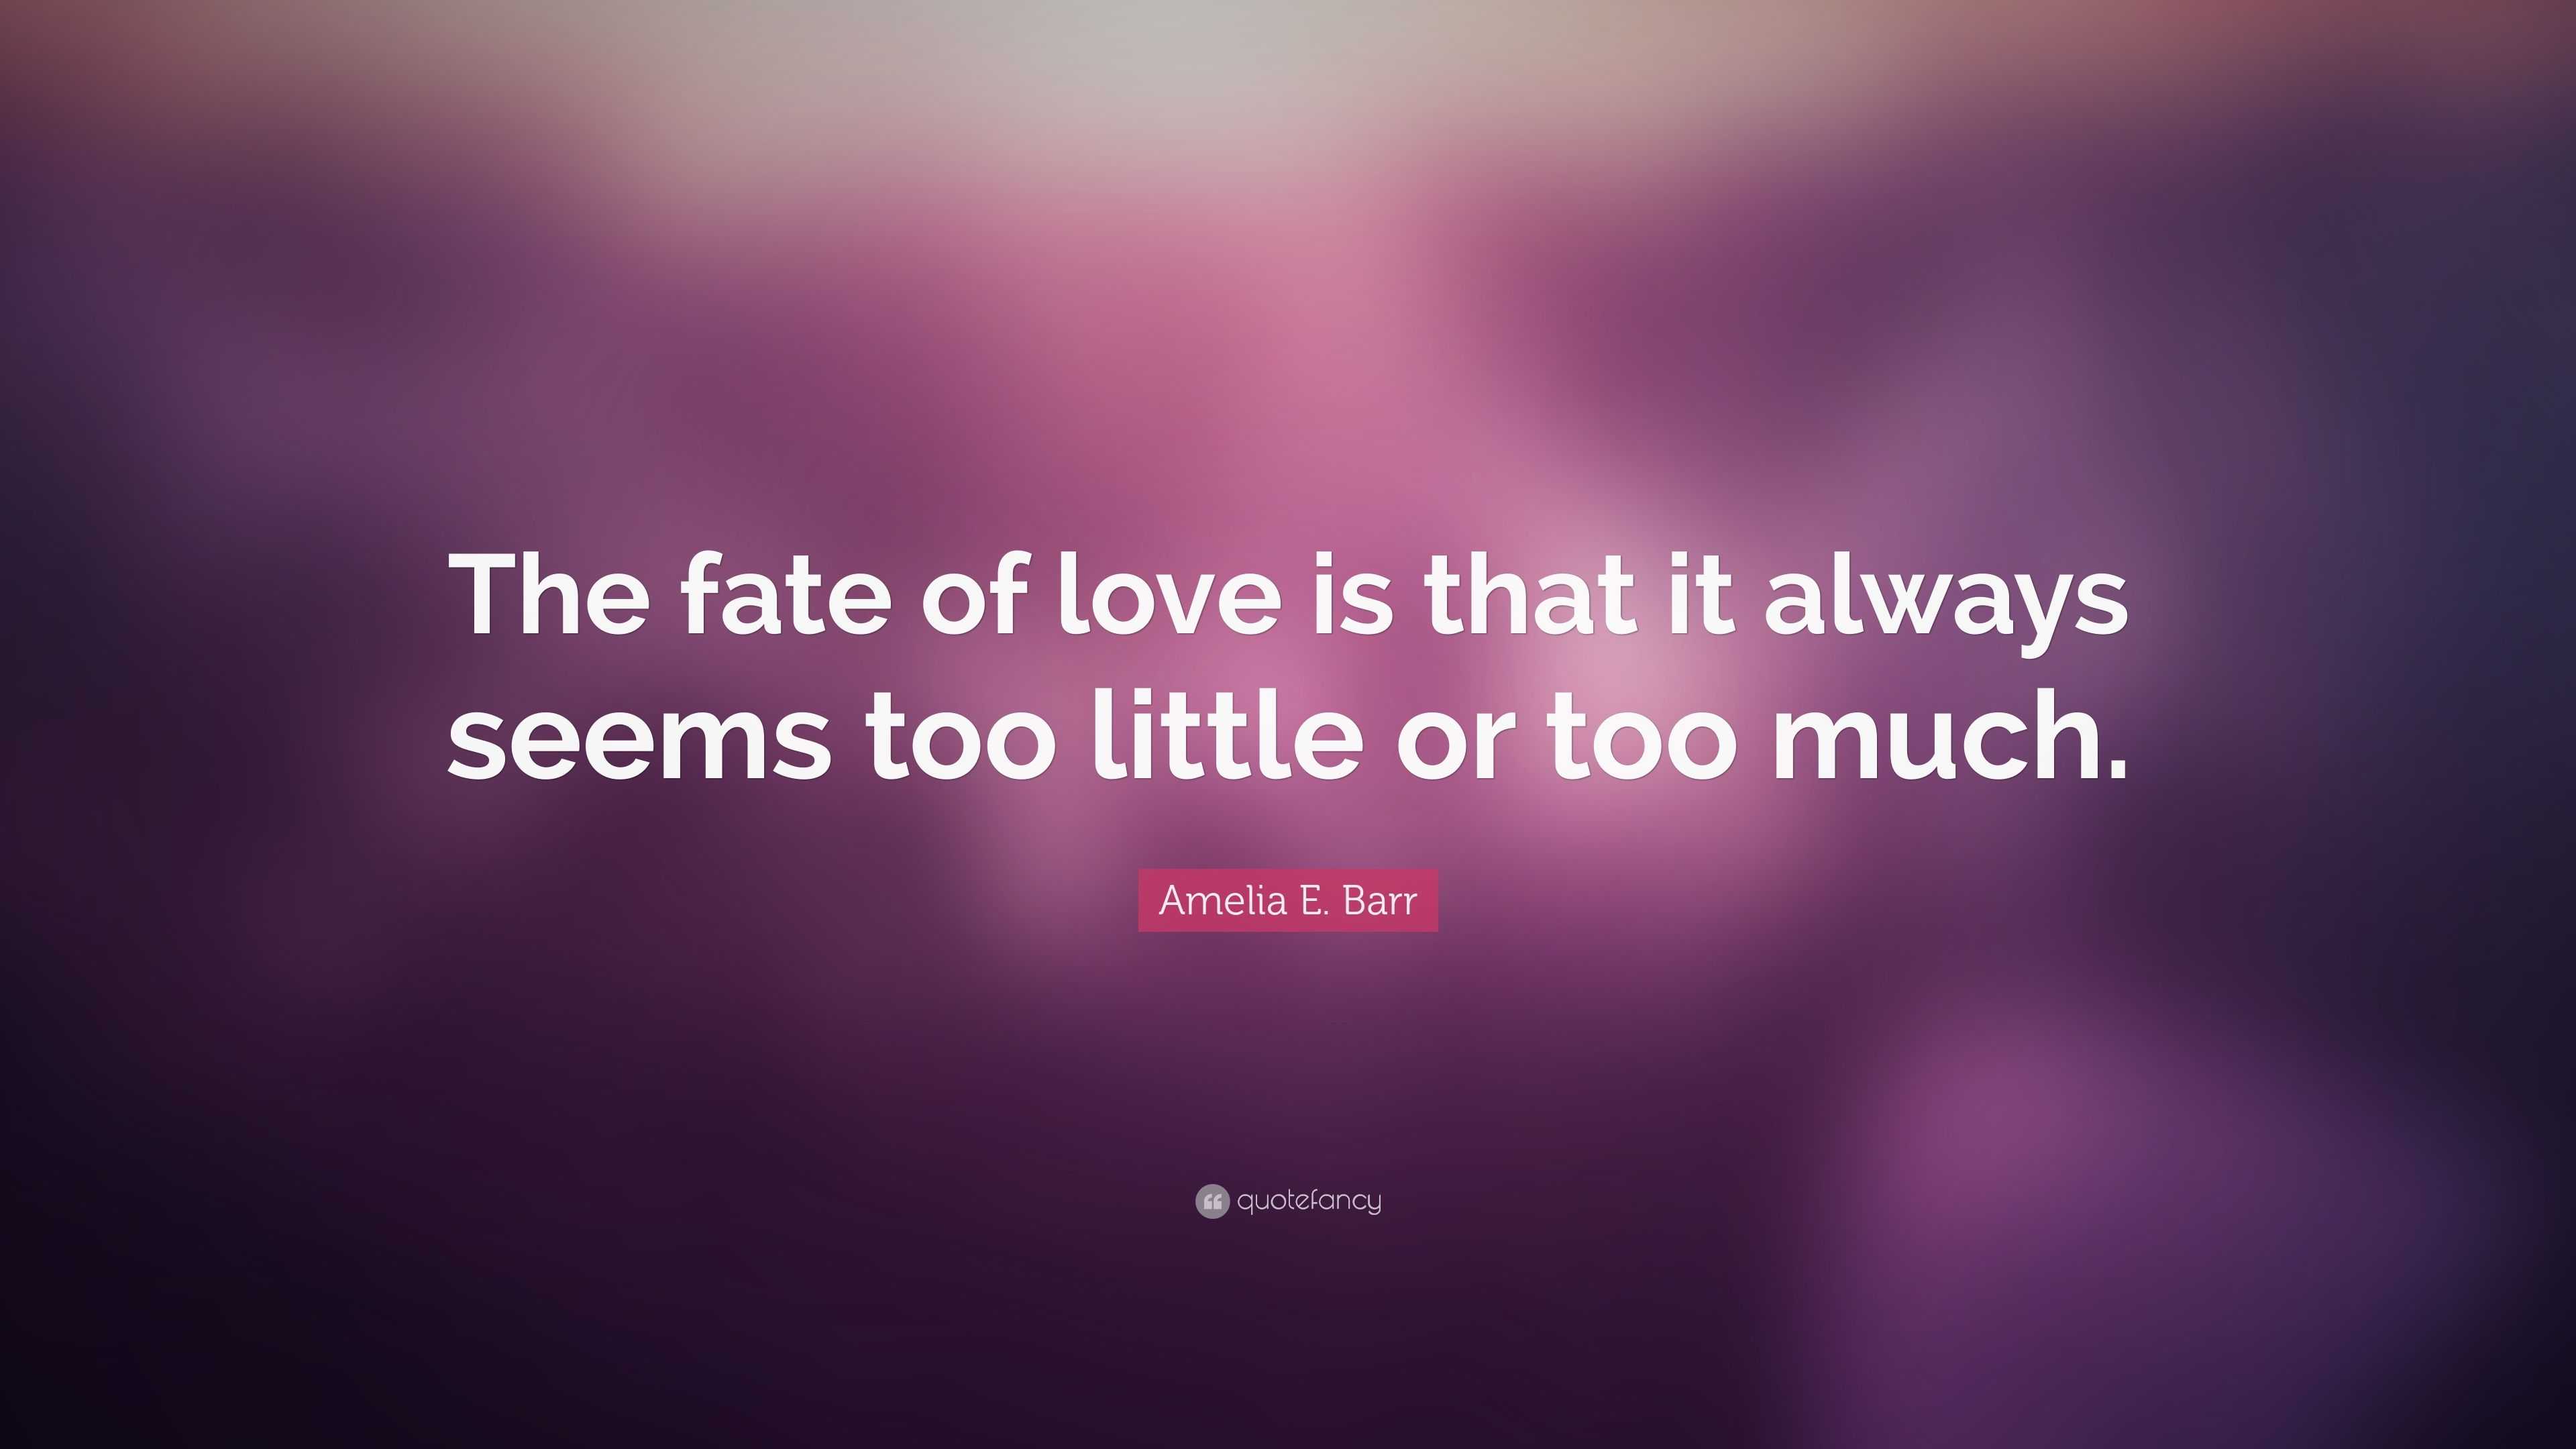 Amelia E. Barr Quote: “The fate of love is that it always seems too ...